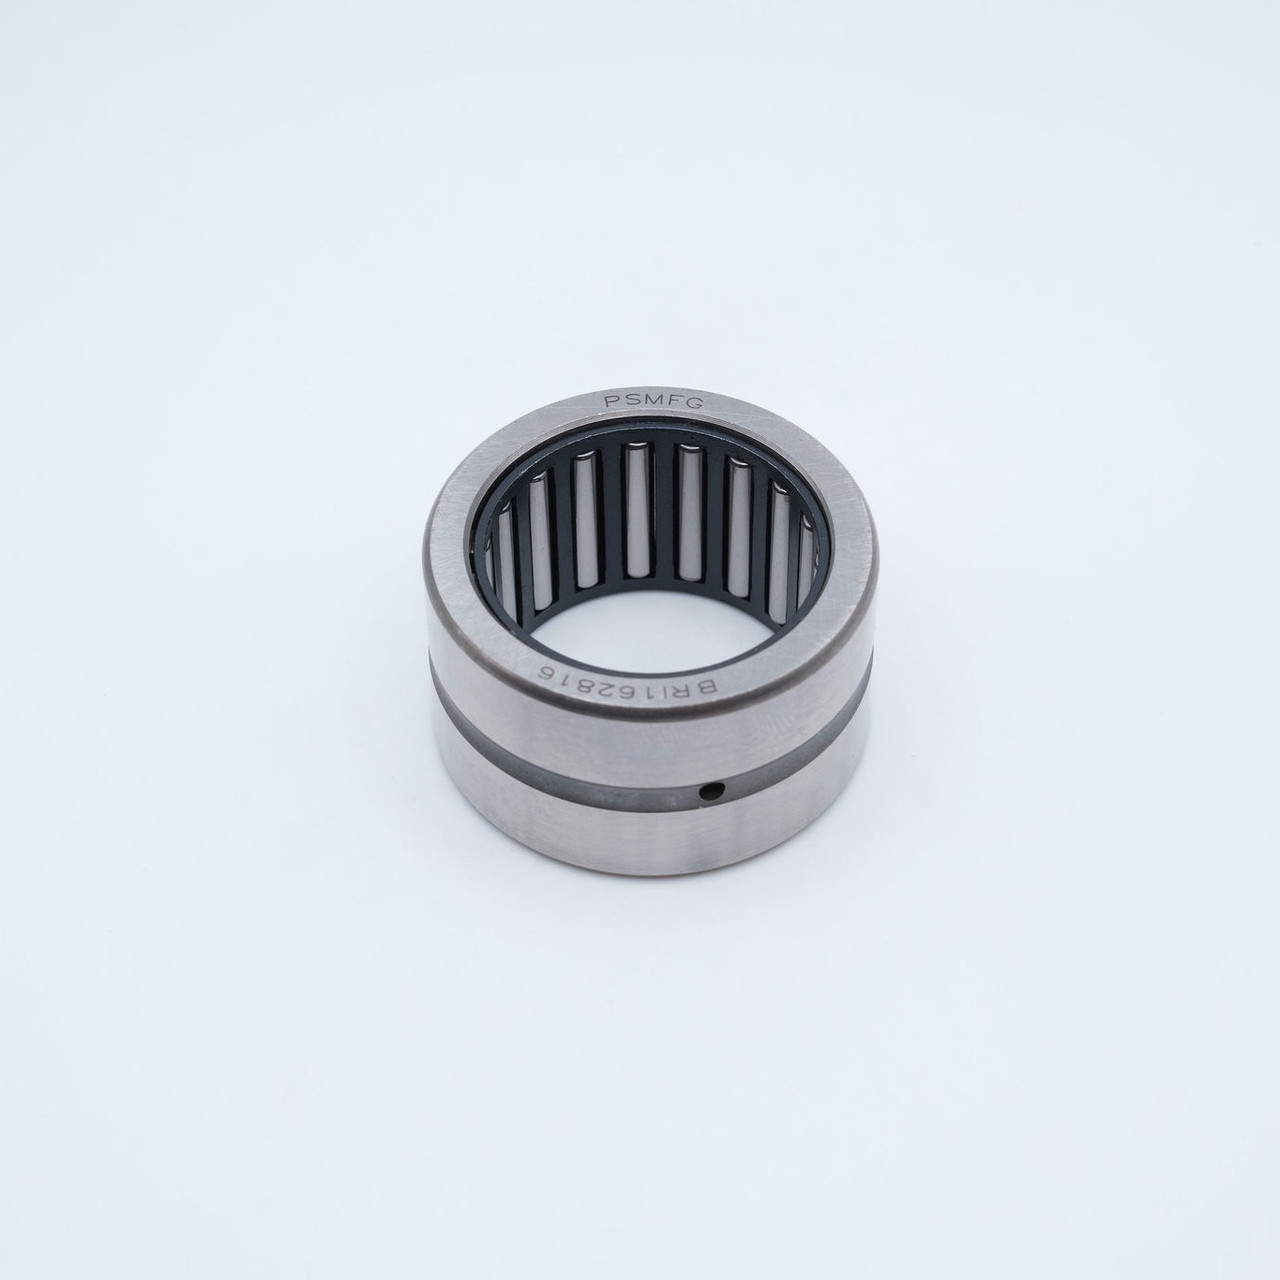 1-3/4 bore BR283720 Machined Needle Roller Bearing 1-3/4x2-5/16x1-1/4" Top View